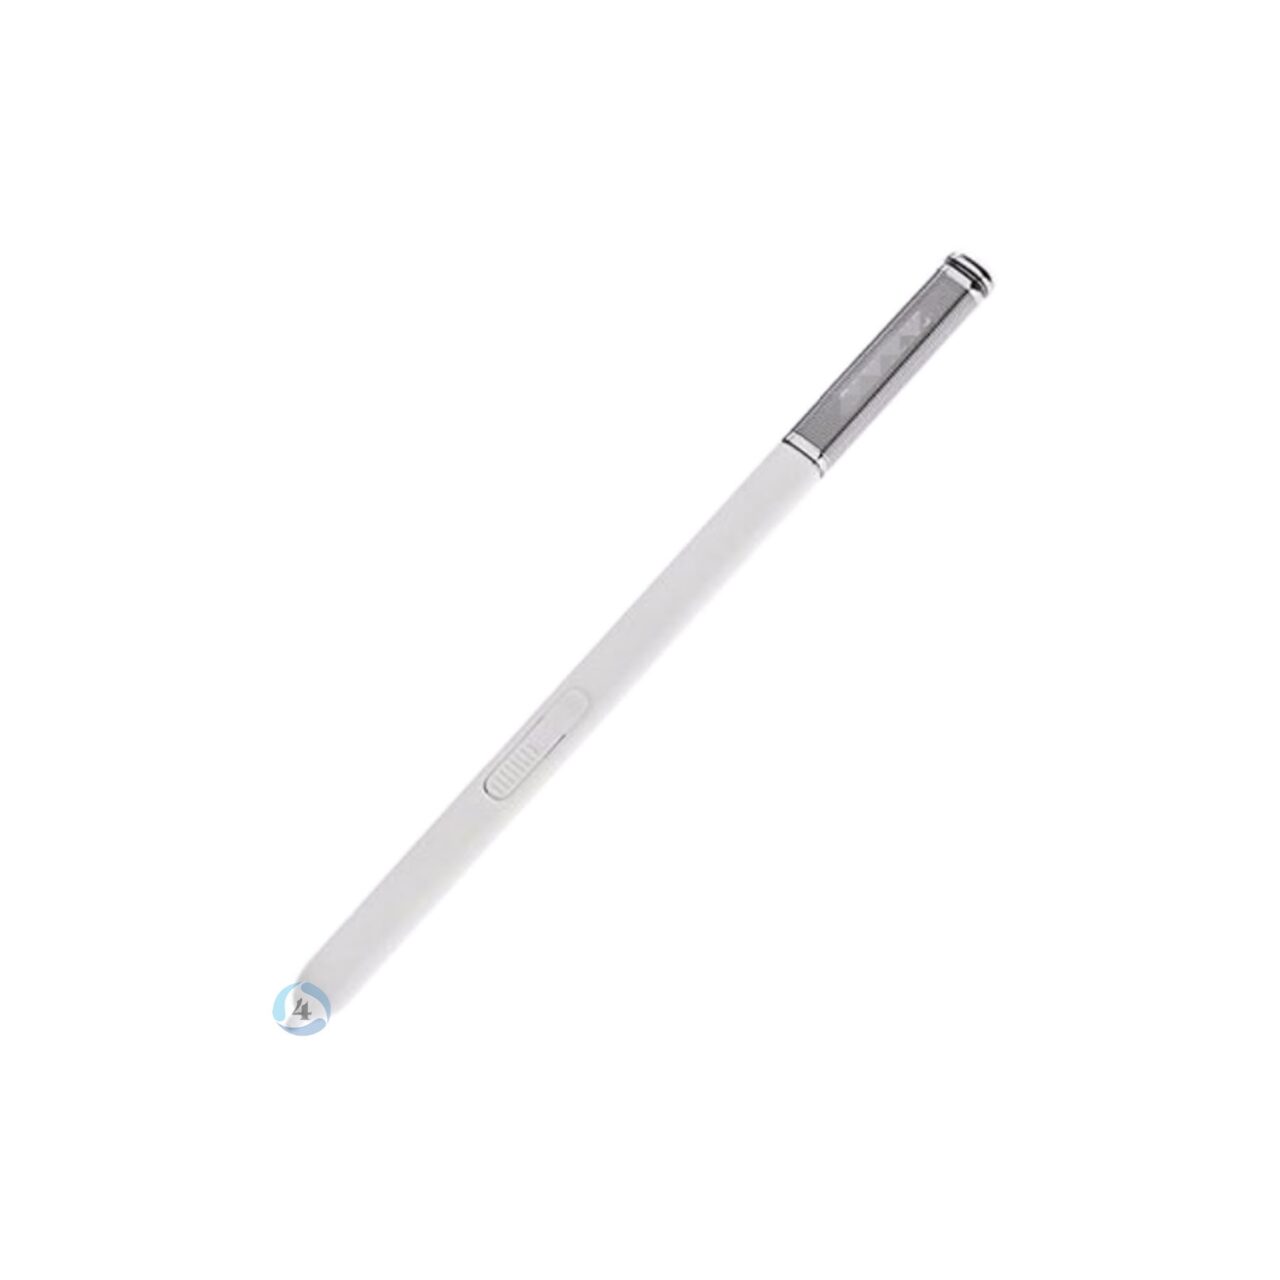 Samsung Note 3 touch pen white